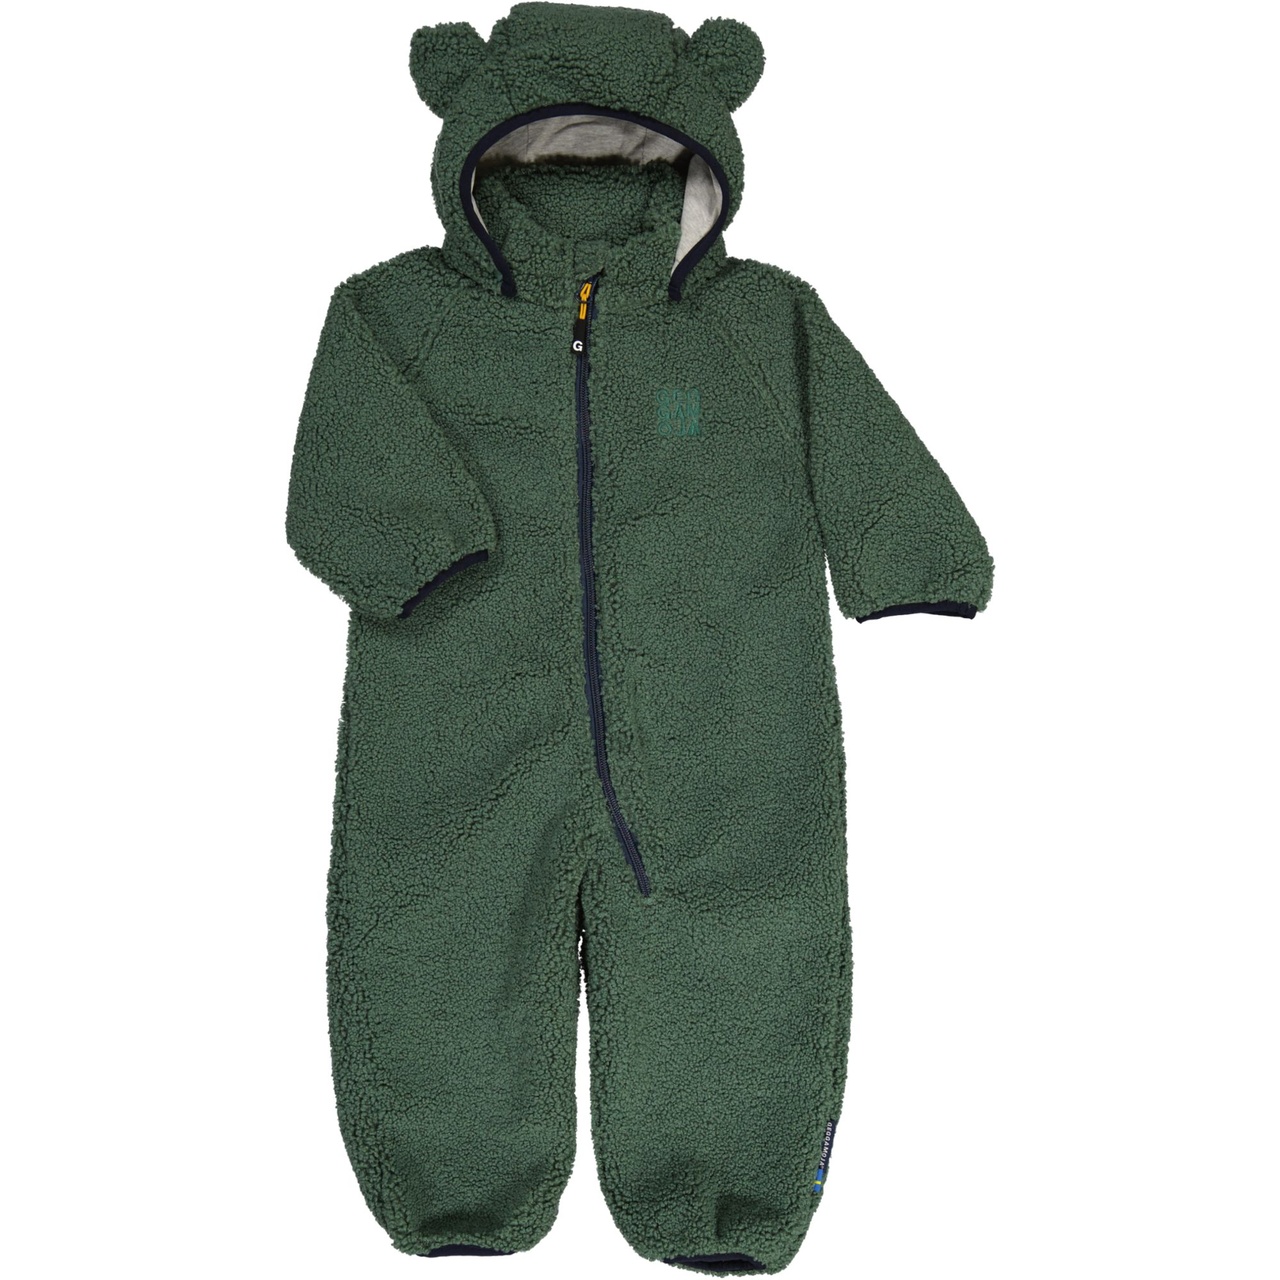 Pile overall Moss green  62/68